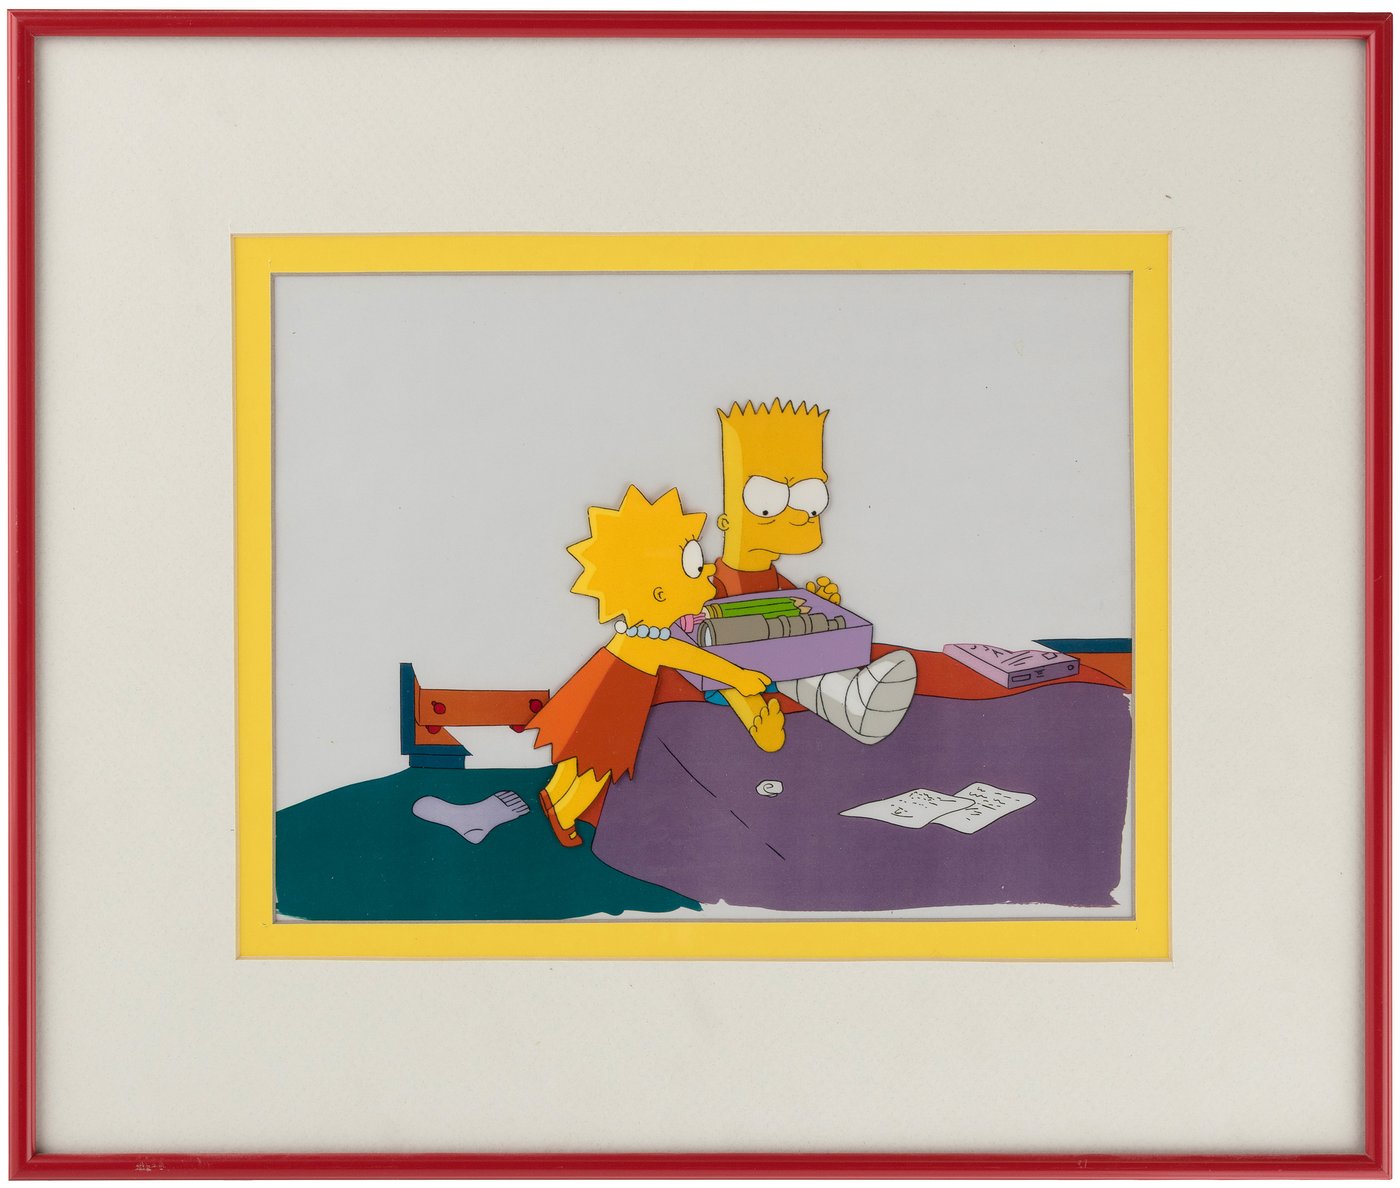 Collectables Collectible Animation Art & Merchandise The Simpsons Bart  Simpson Close-Up Original Production Drawing Animation Art UF 